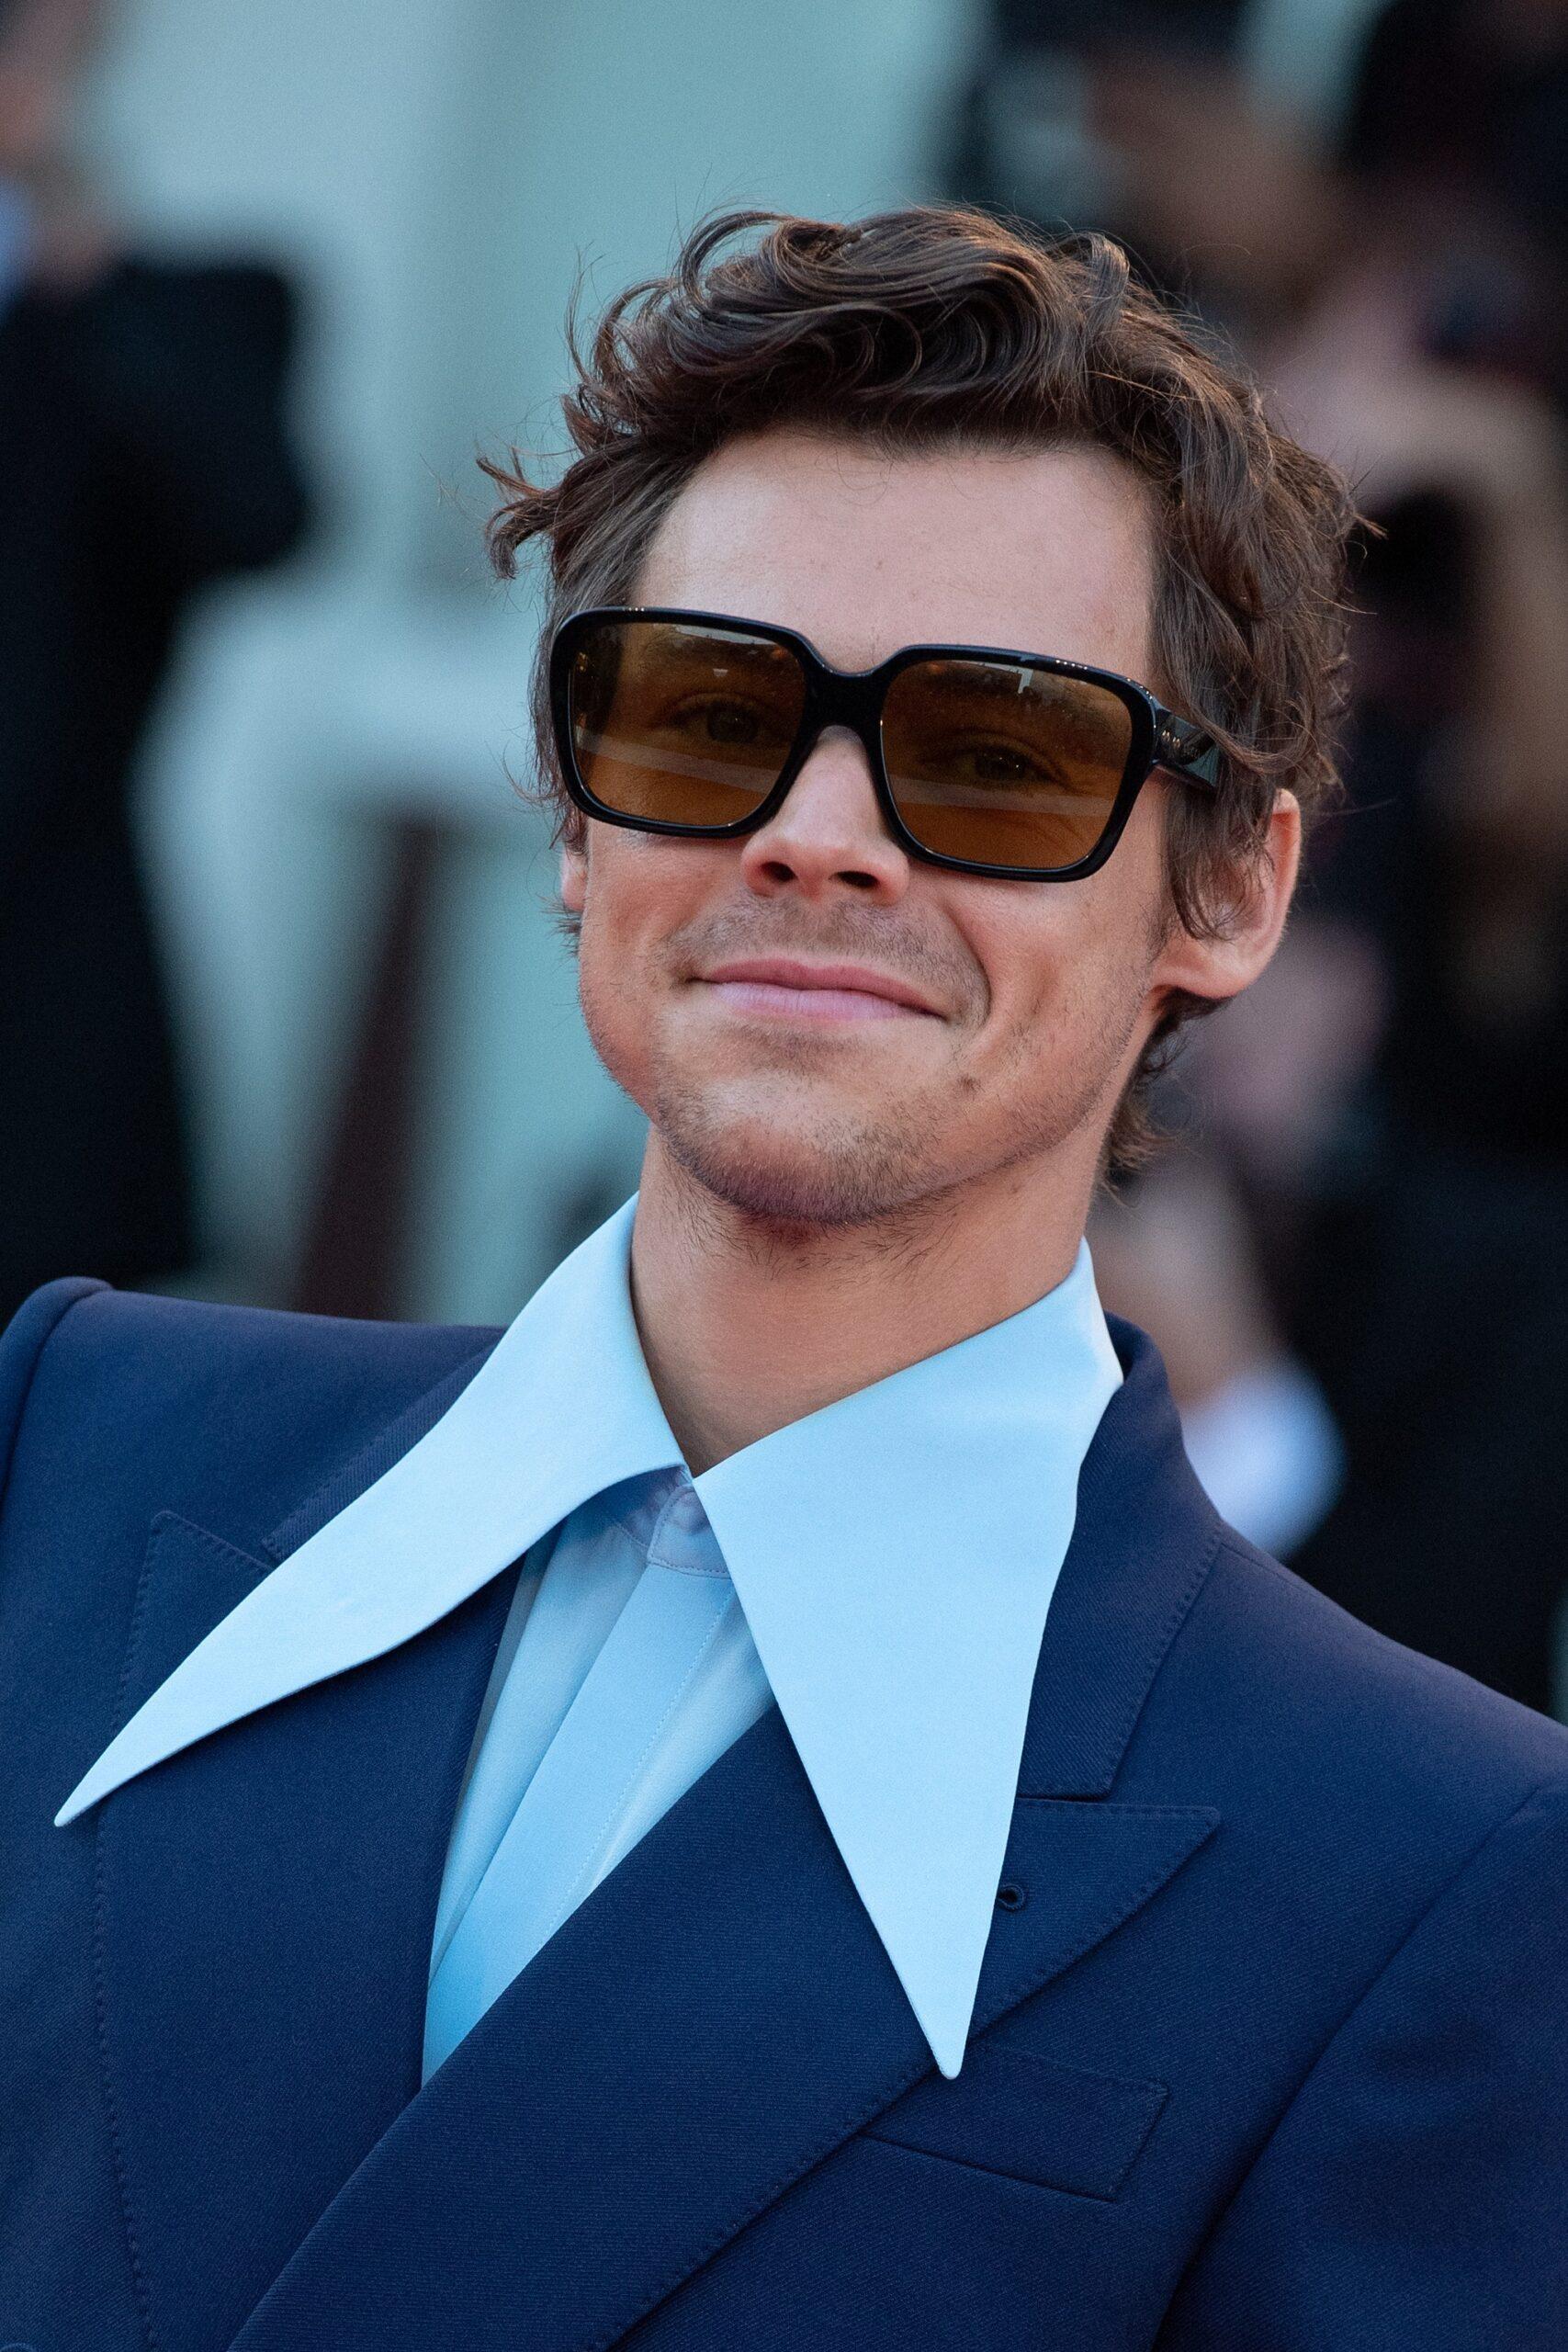 Harry Styles attends the "Don't Worry Darling" red carpet at the 79th Venice International Film Festival